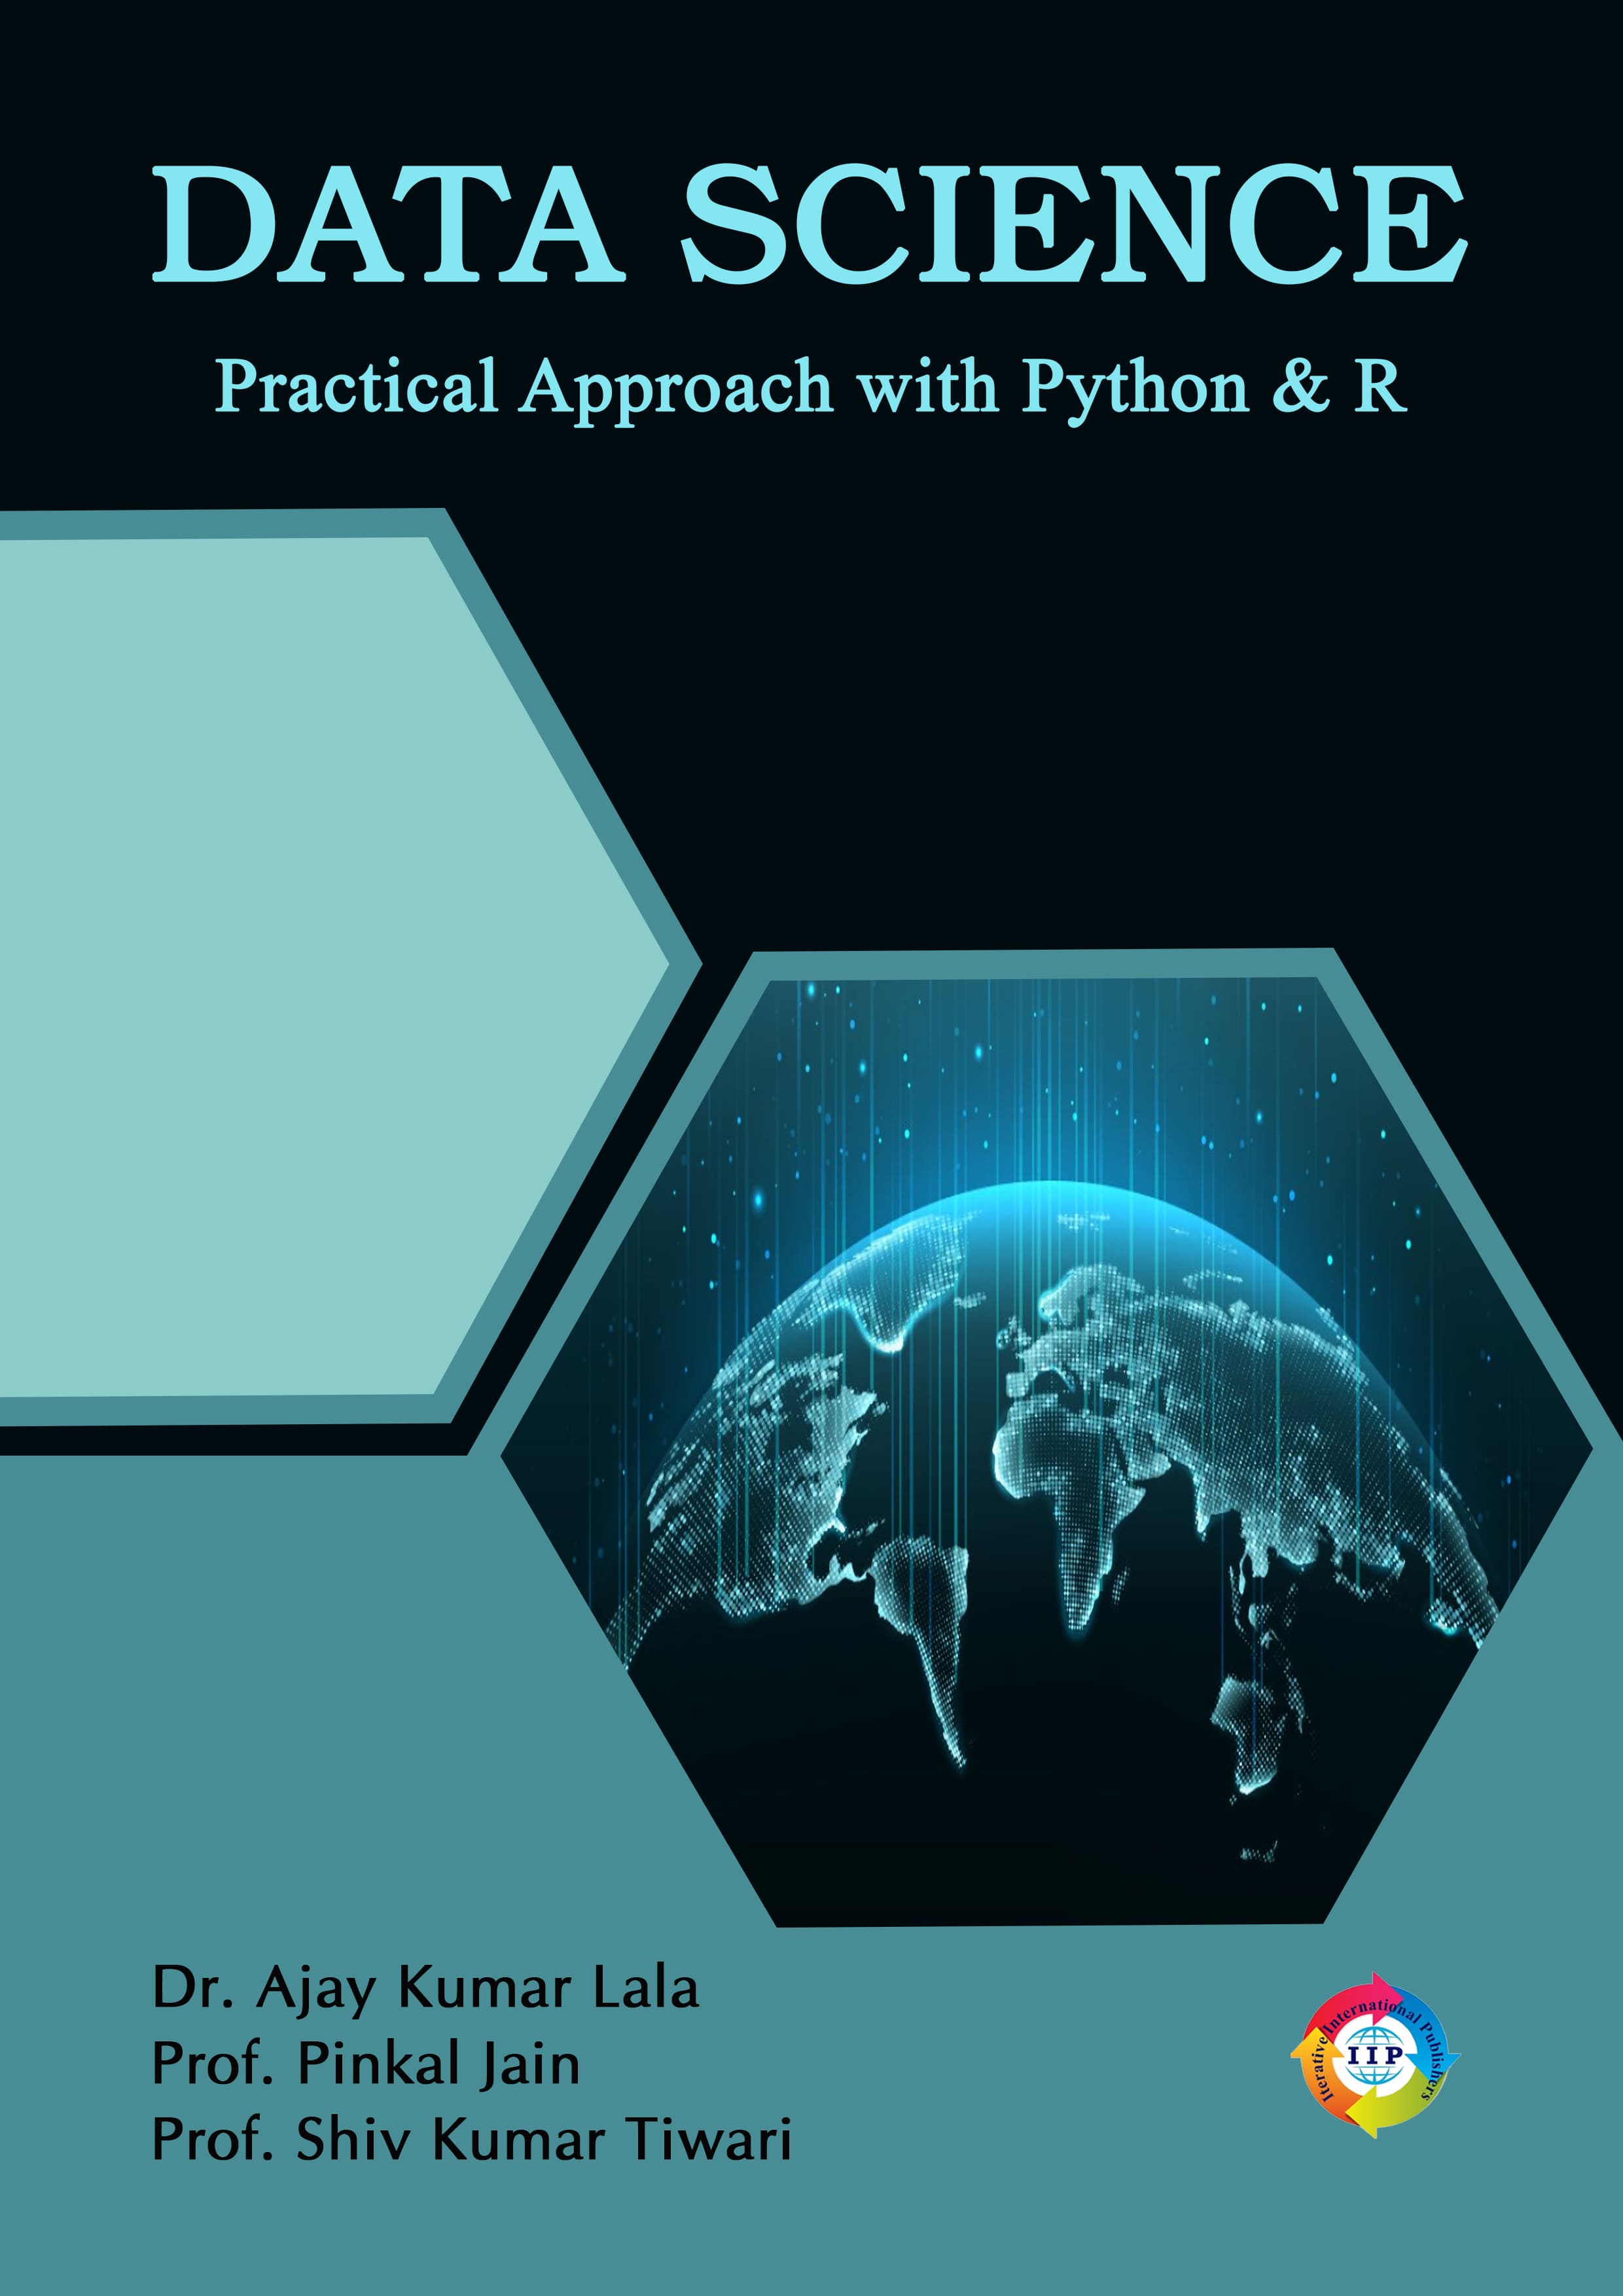 Data Science: Practical Approach with Python & R